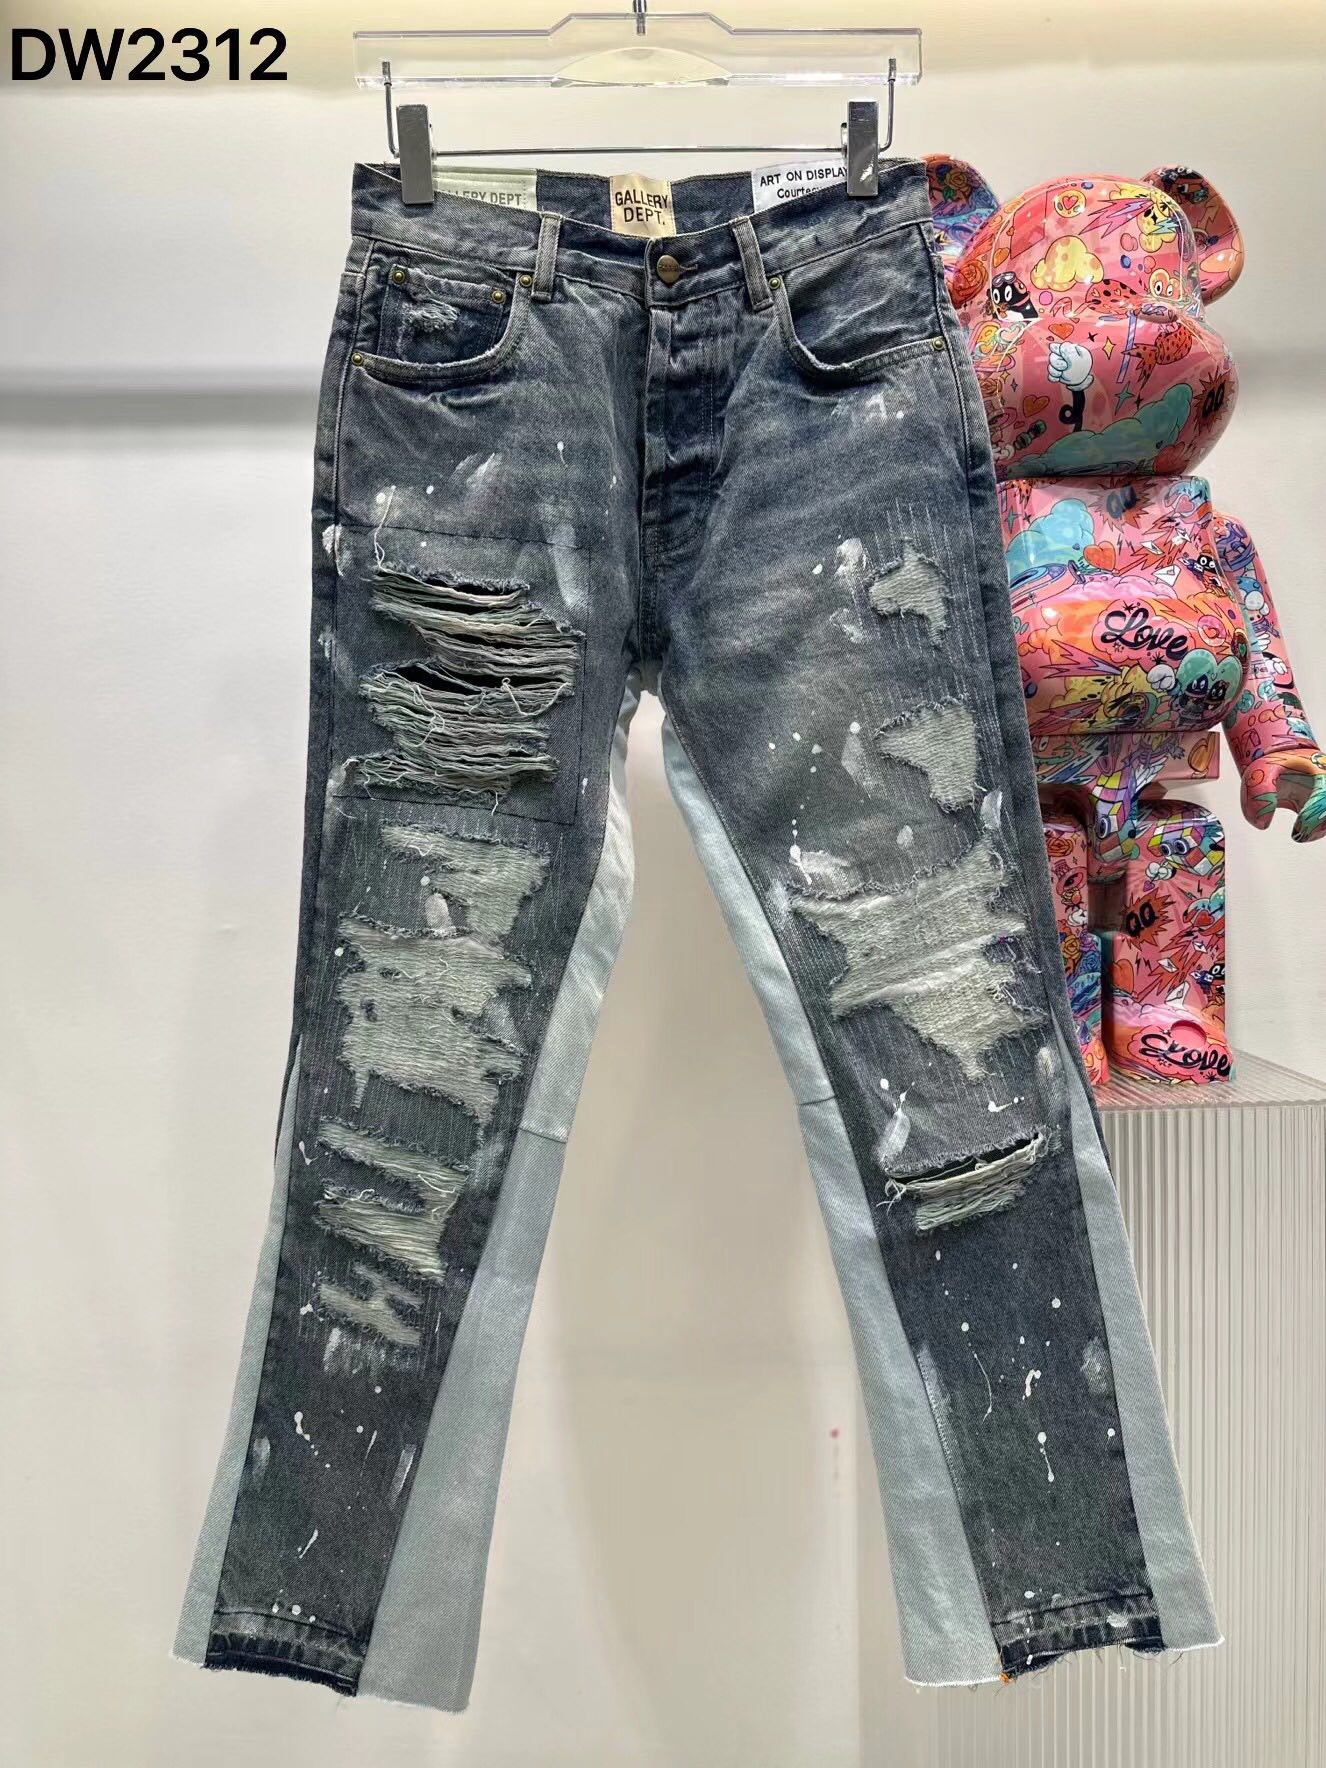 US$ 189.91 - 1:1 quality version Inkjet ripped jeans - www.repdog.cn